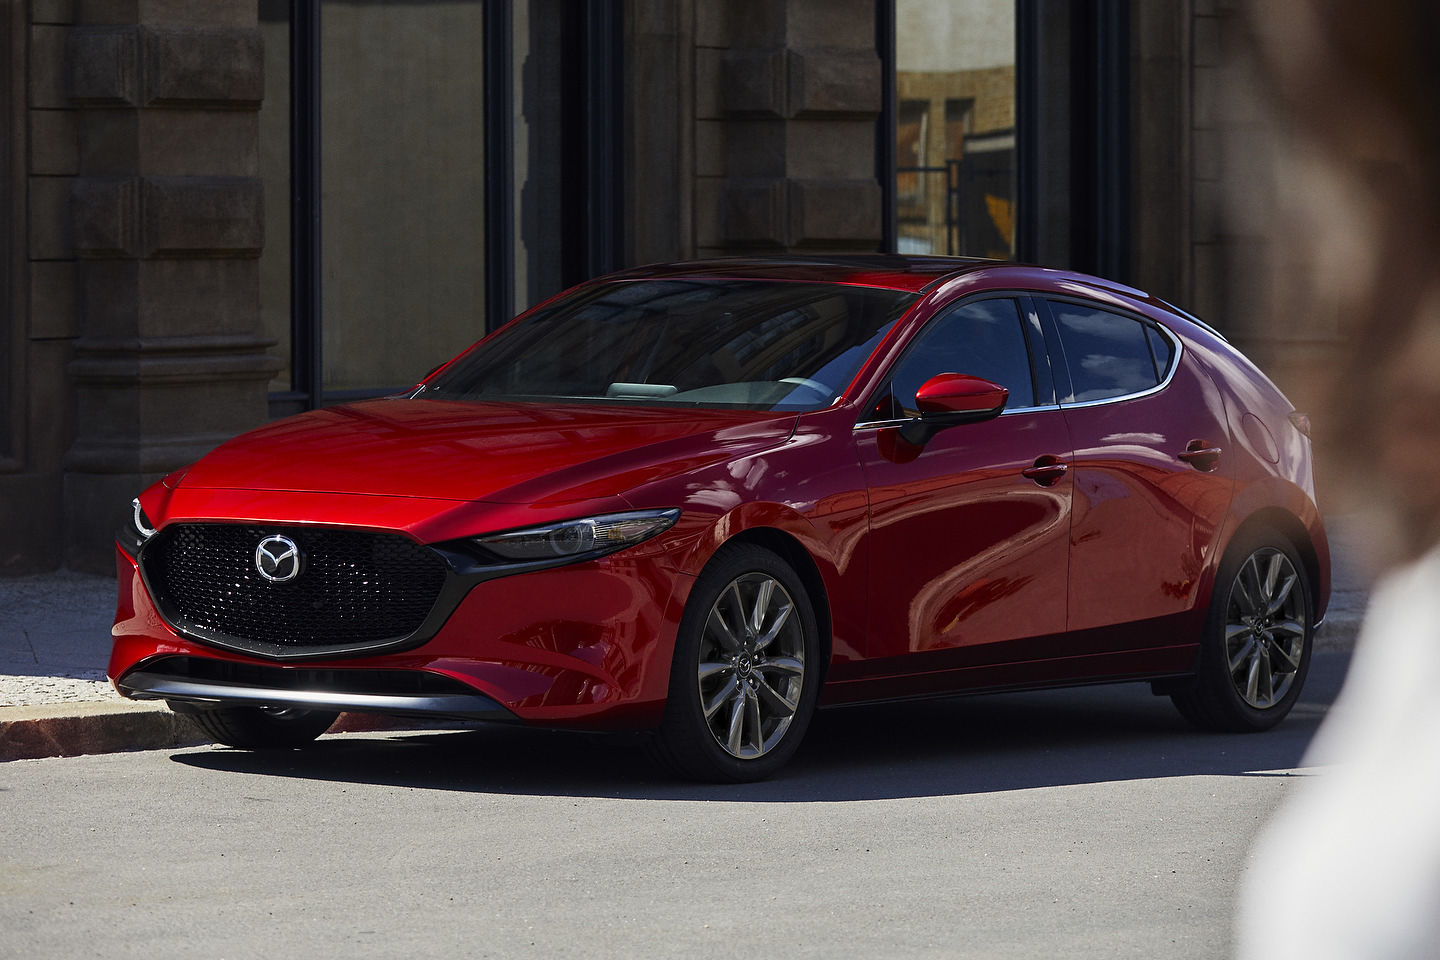 Three things to know about the new i-ACTIV AWD 2019 Mazda3